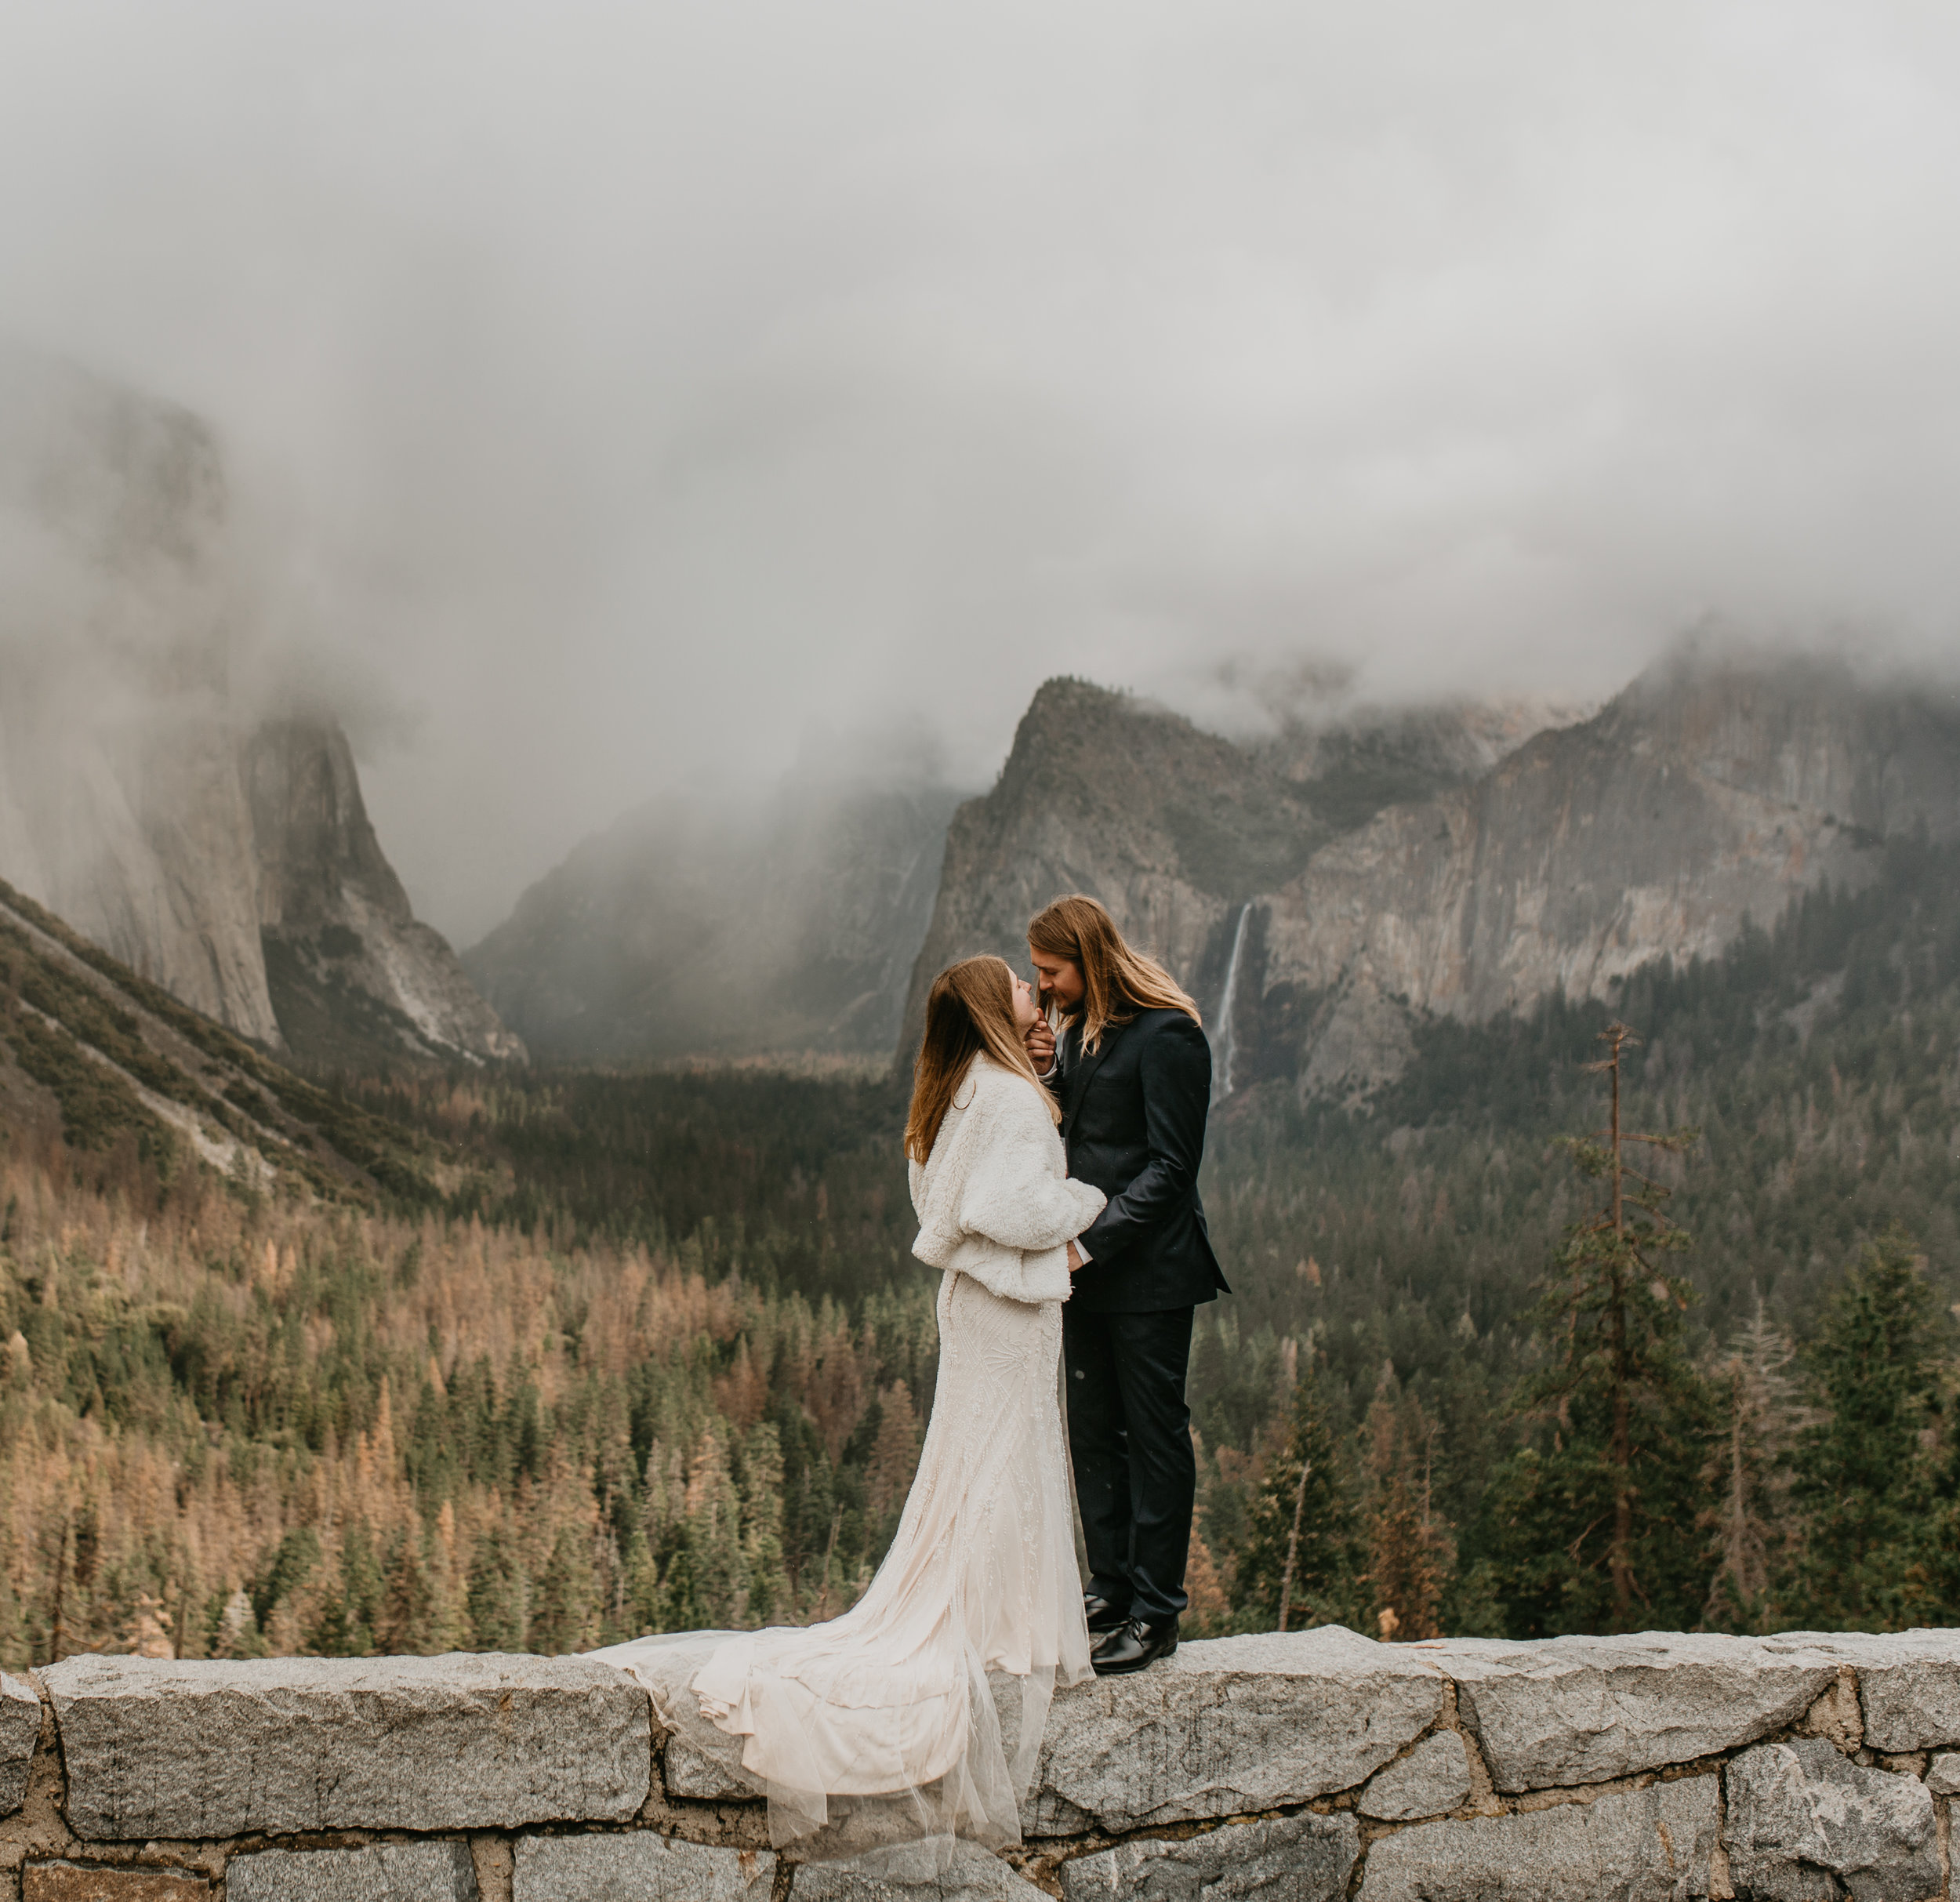 nicole-daacke-photography-yousemite-national-park-elopement-photographer-winter-cloud-moody-elope-inspiration-yosemite-valley-tunnel-view-winter-cloud-fog-weather-wedding-photos-11.jpg